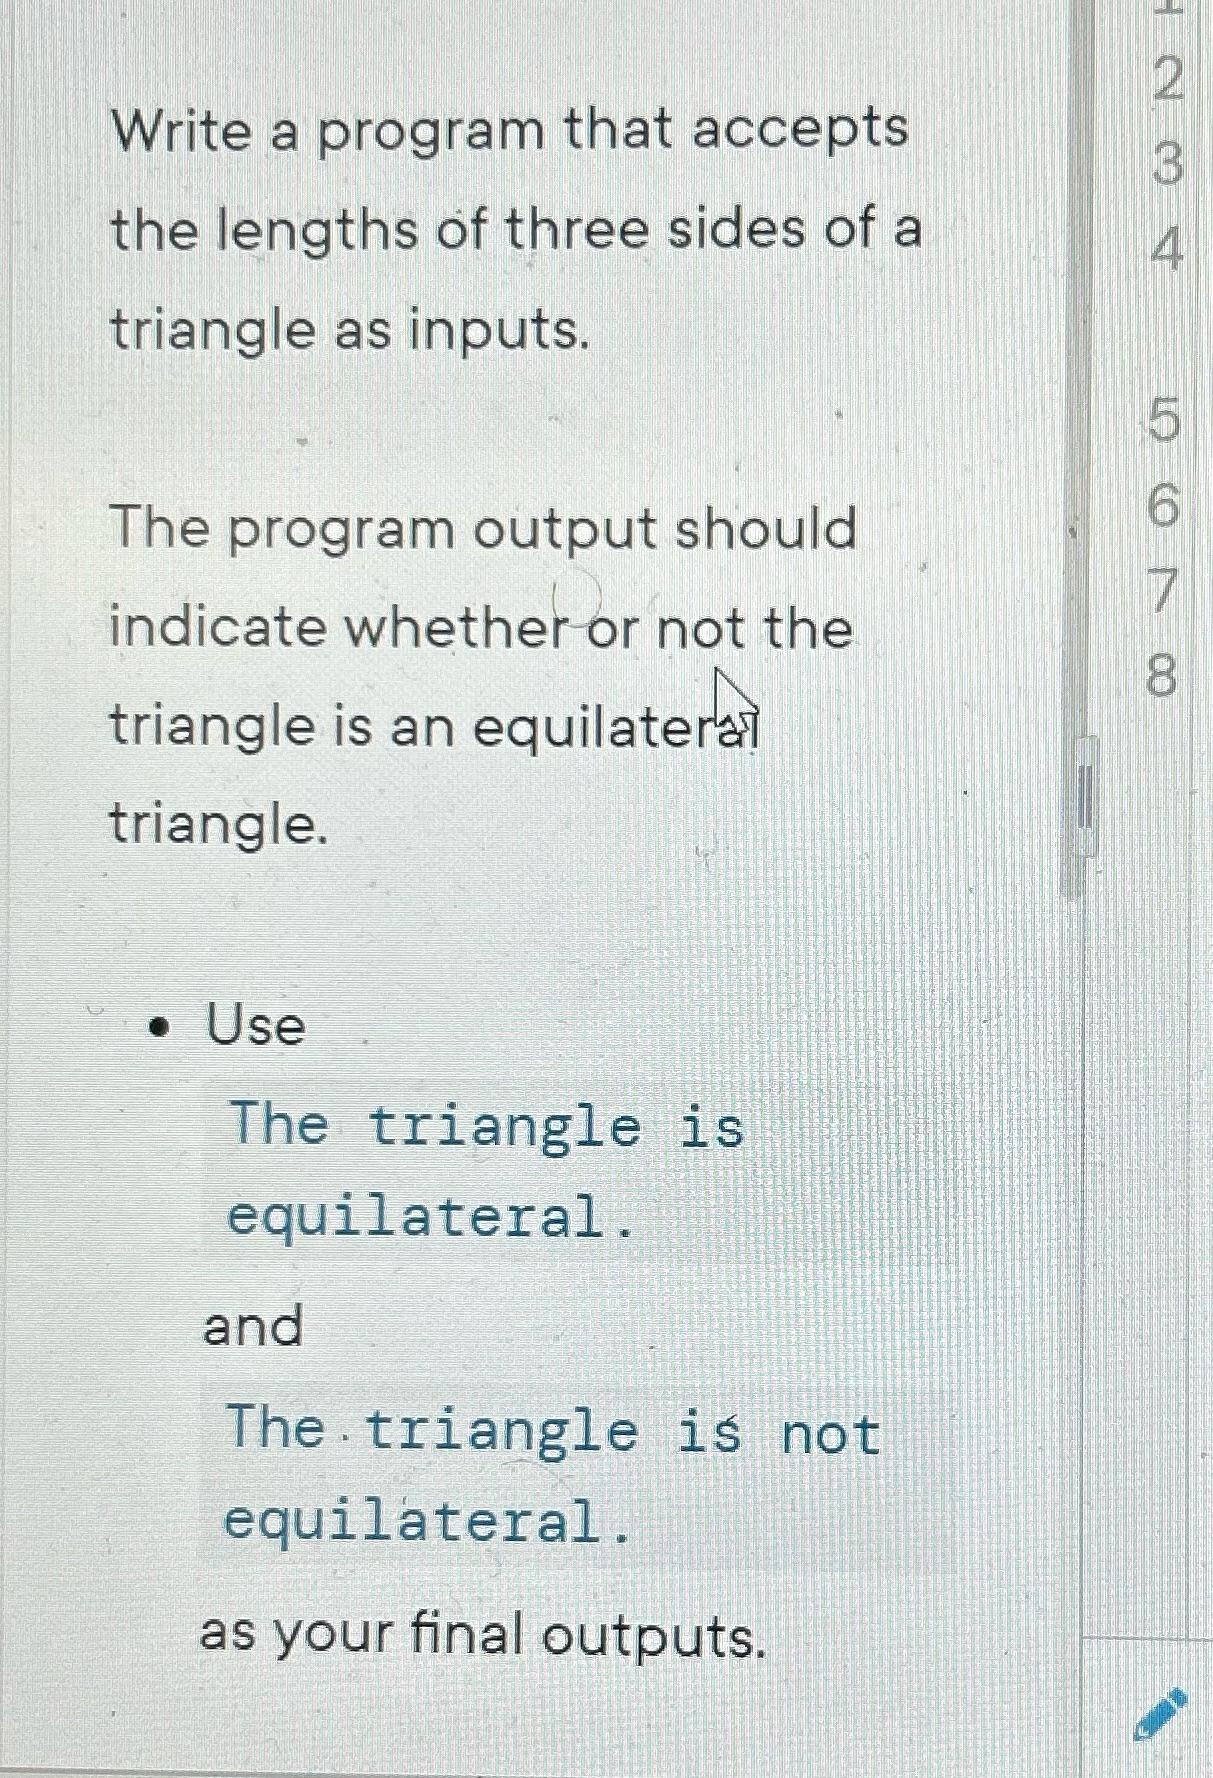 Write a program that accepts the lengths of three sides of a triangle as inputs. The program output should